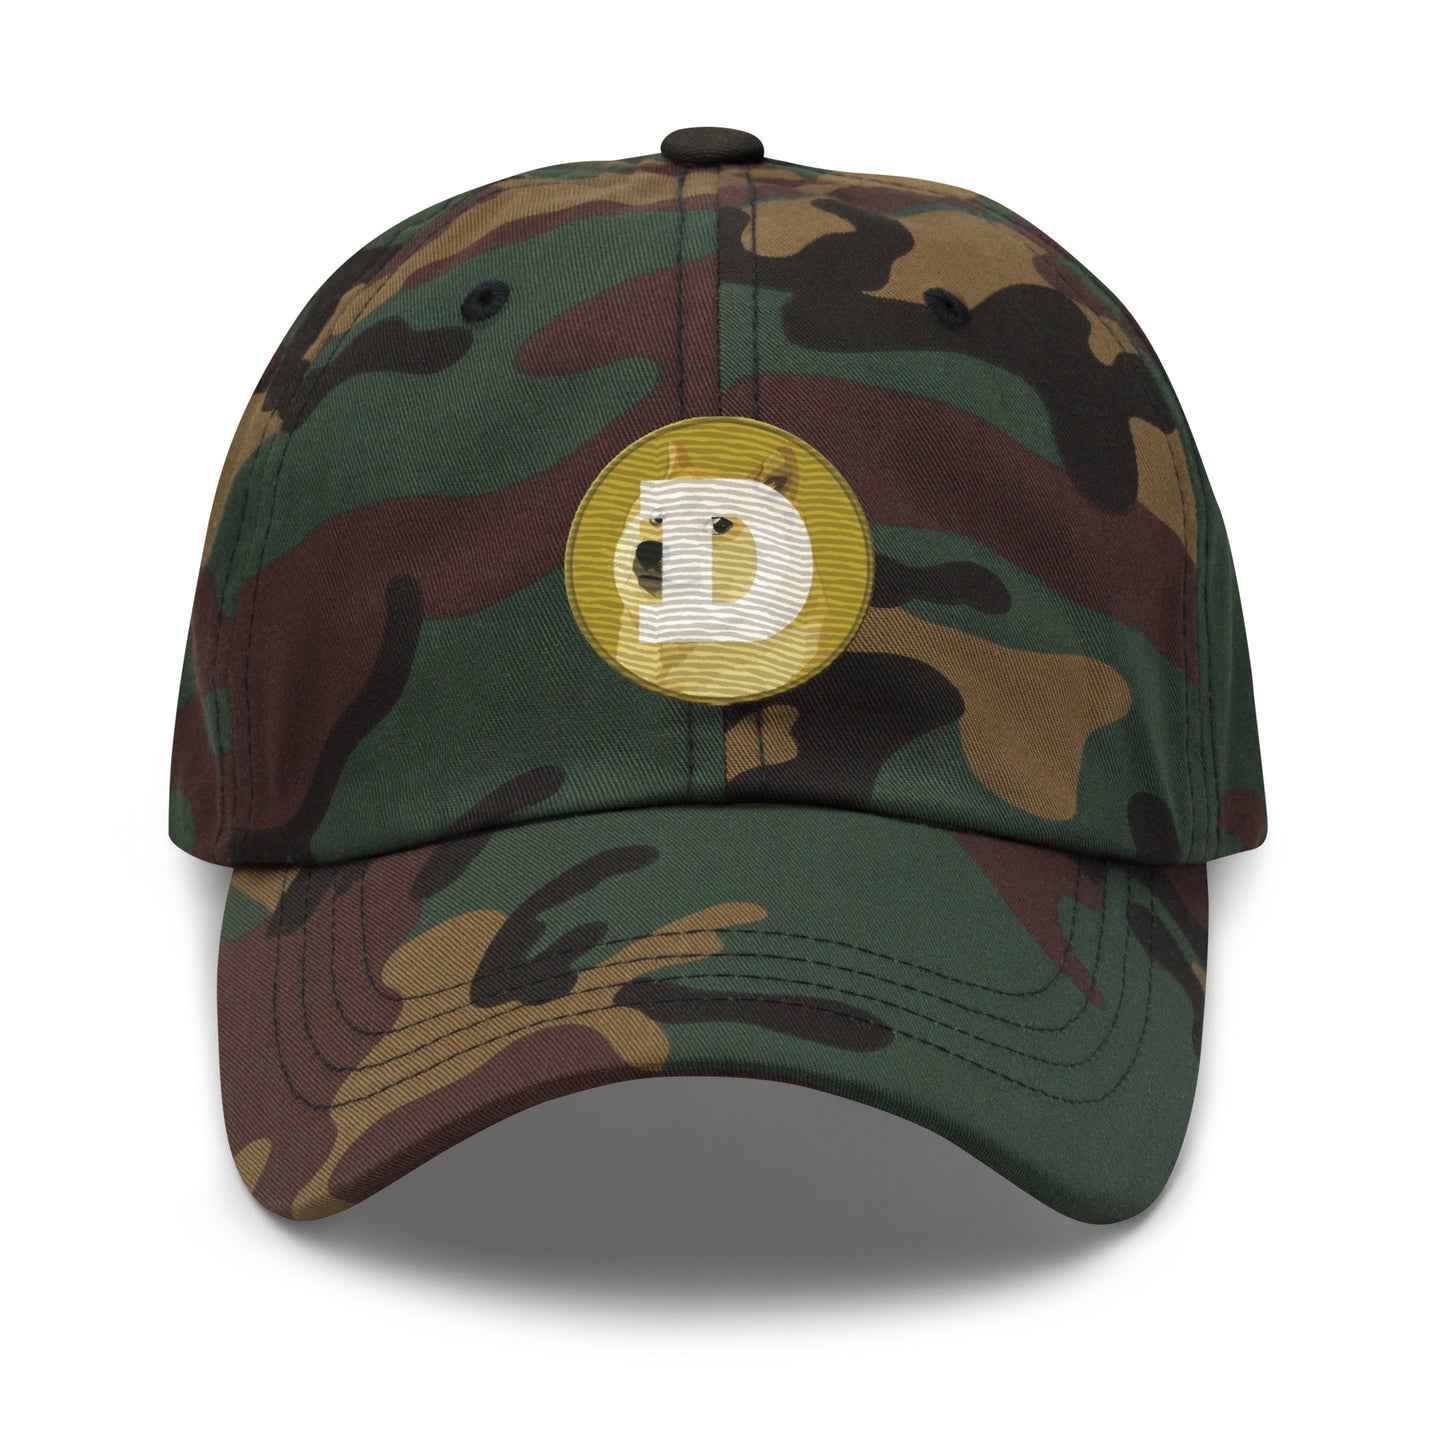 Doge Coin Dad hat - Hodlers Crypto Merch Brand